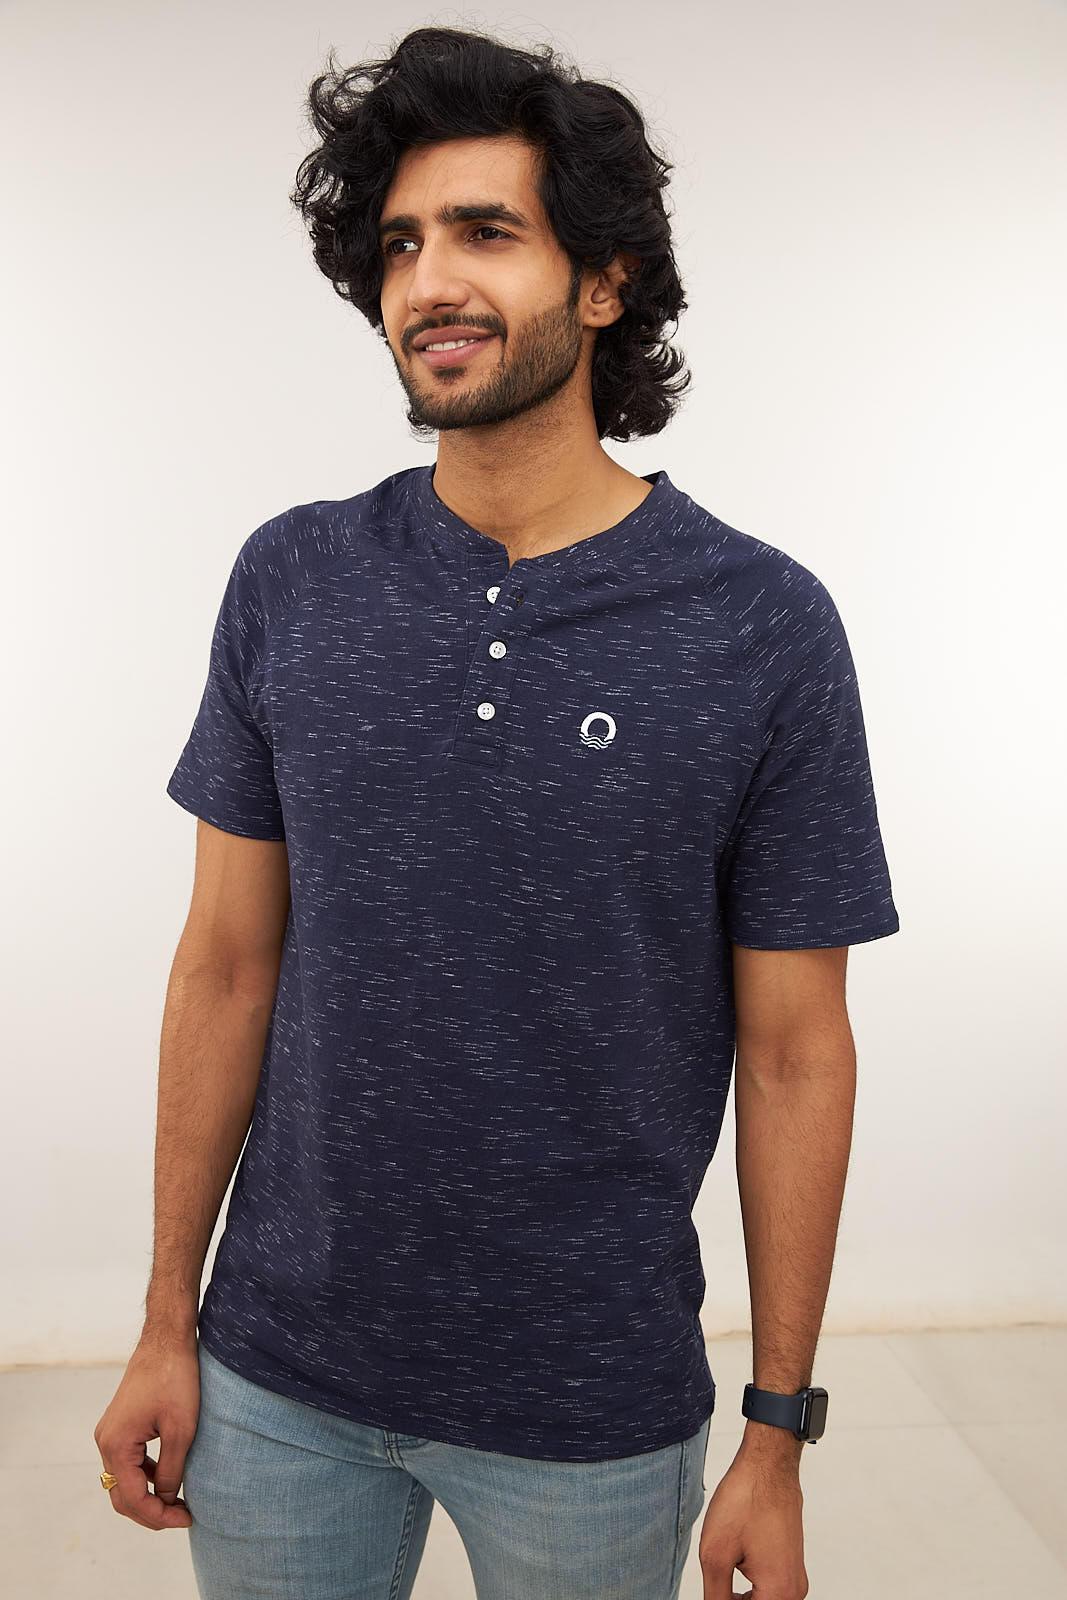 The San Miguel T-shirt Navy